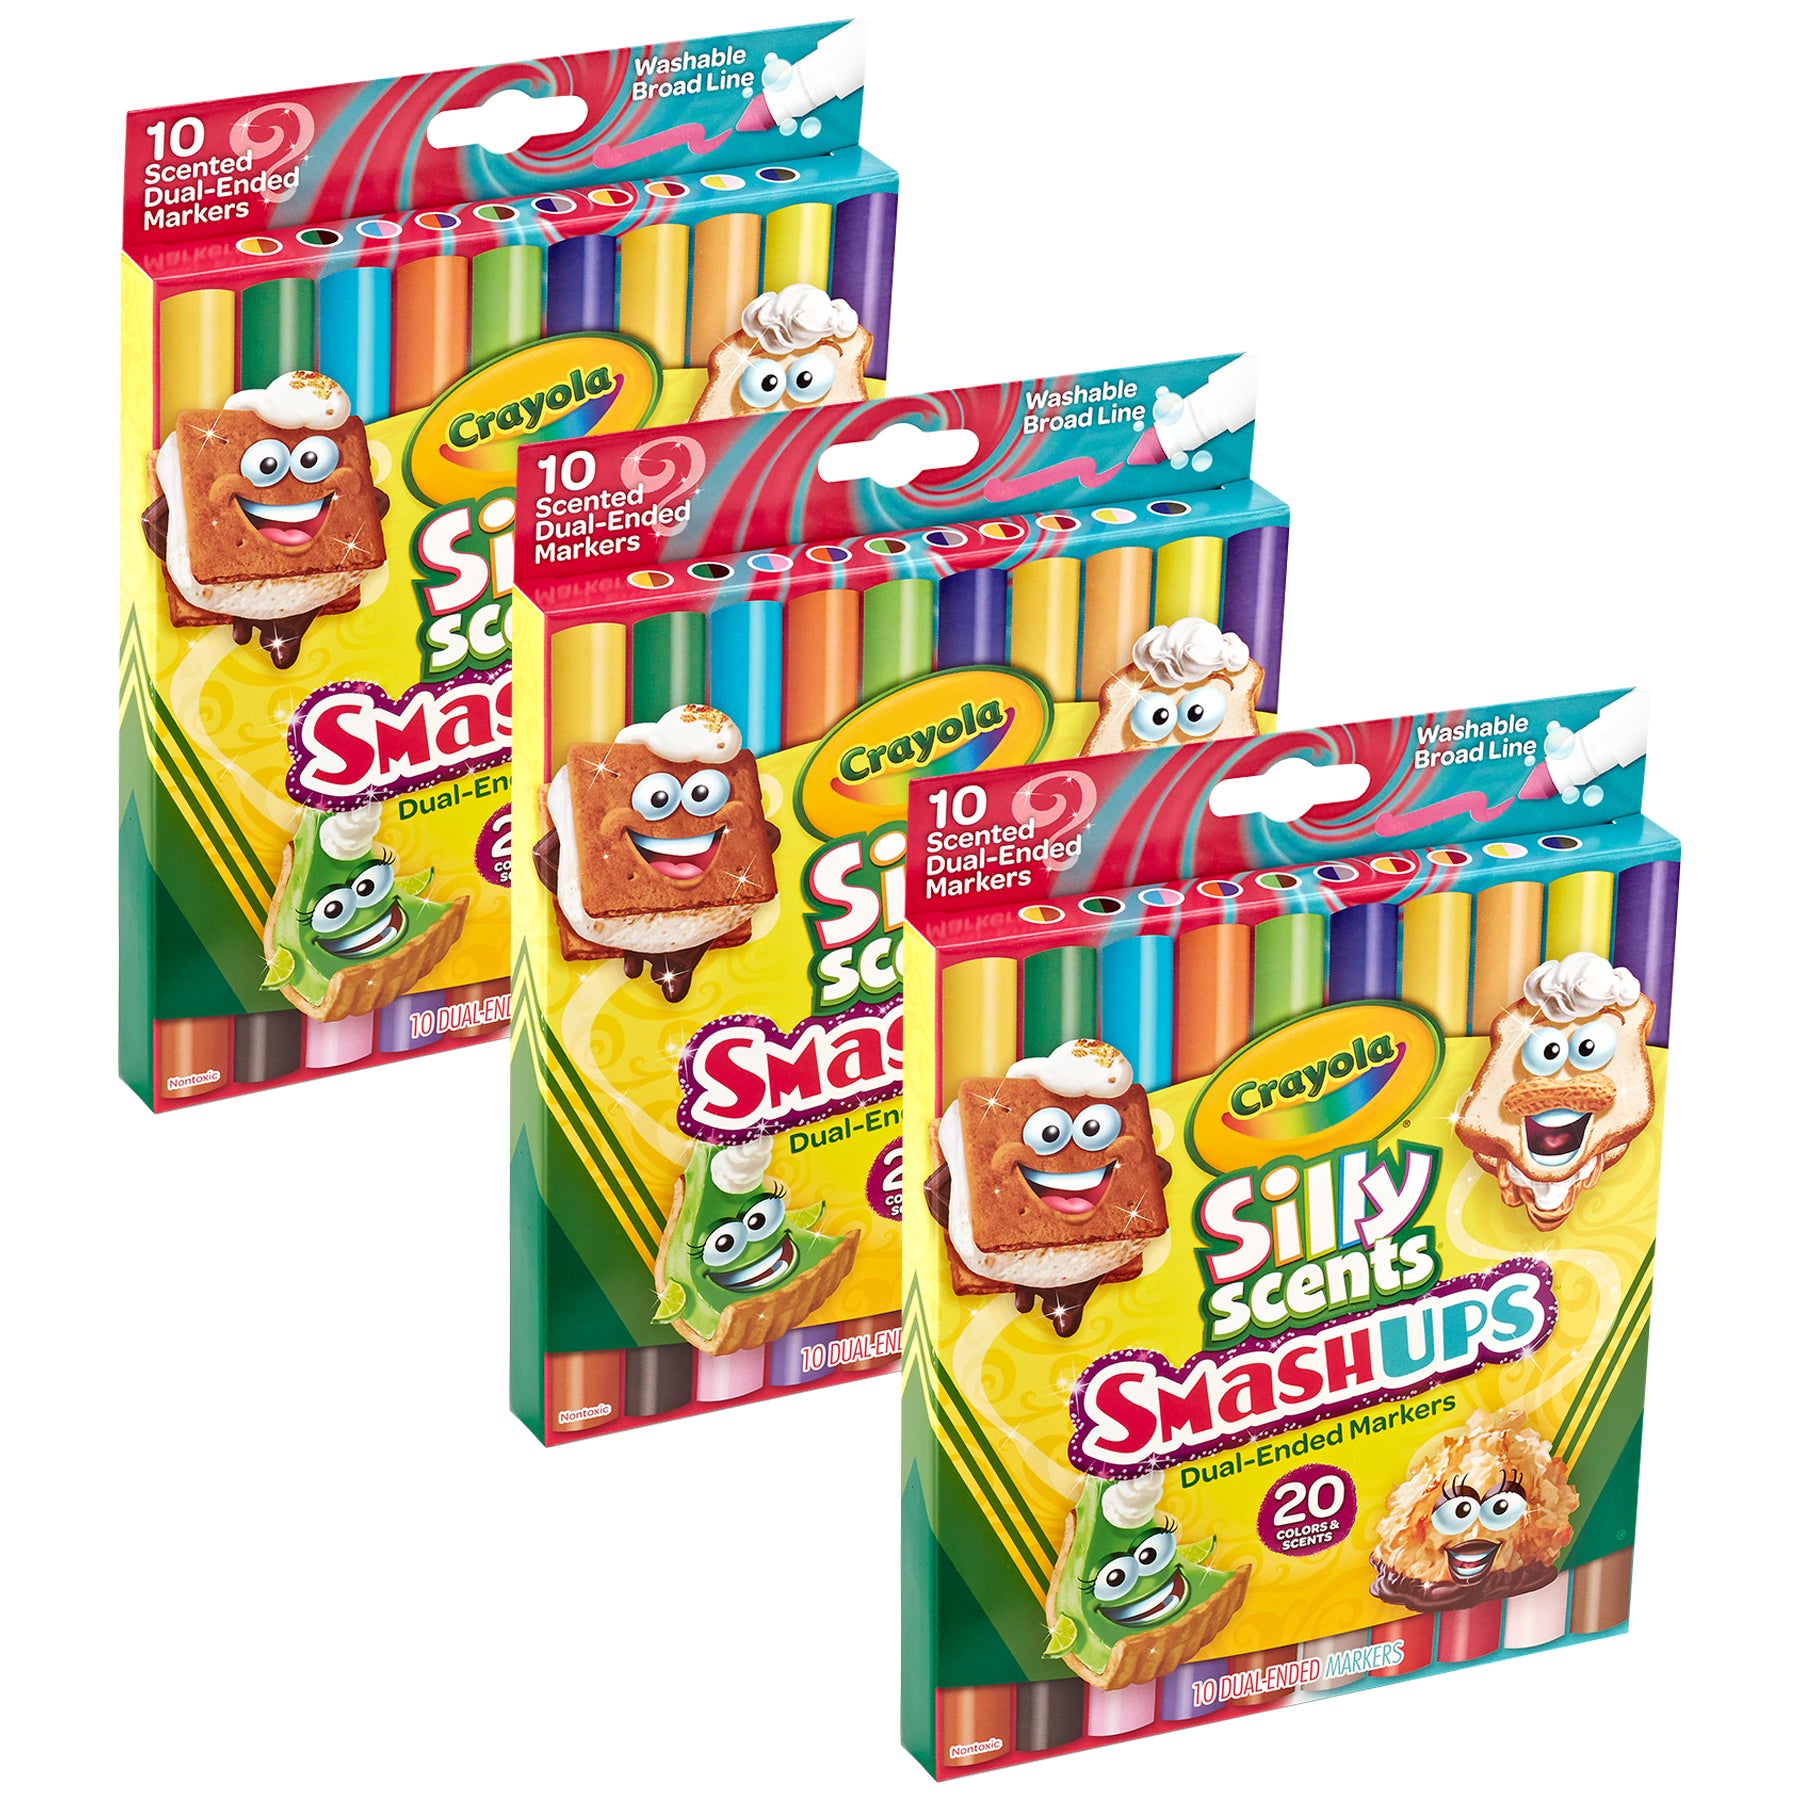 Silly Scents Smash Ups Dual-Ended Washable Markers, 10 Per Pack, 3 Packs